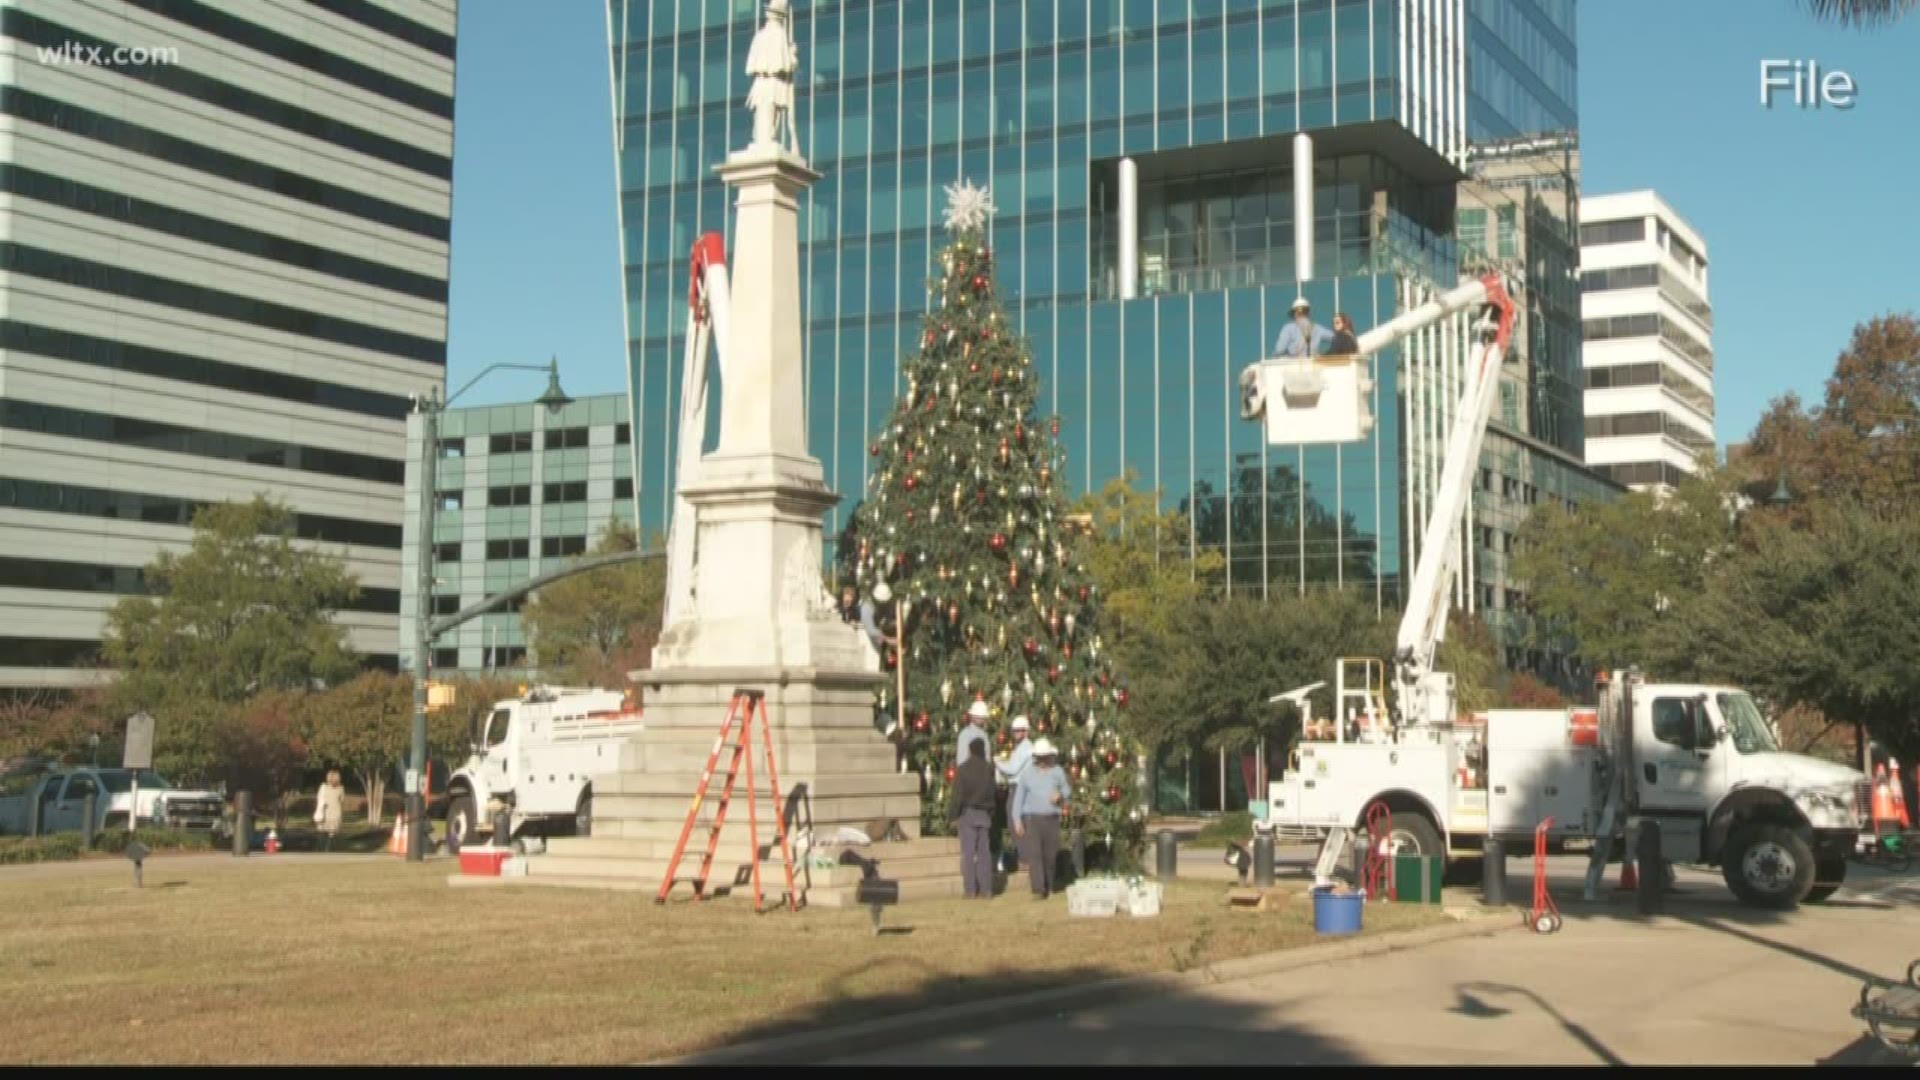 The Christmas tree that will be at the South Carolina Statehouse will arrive Tuesday, November 12, 2019.